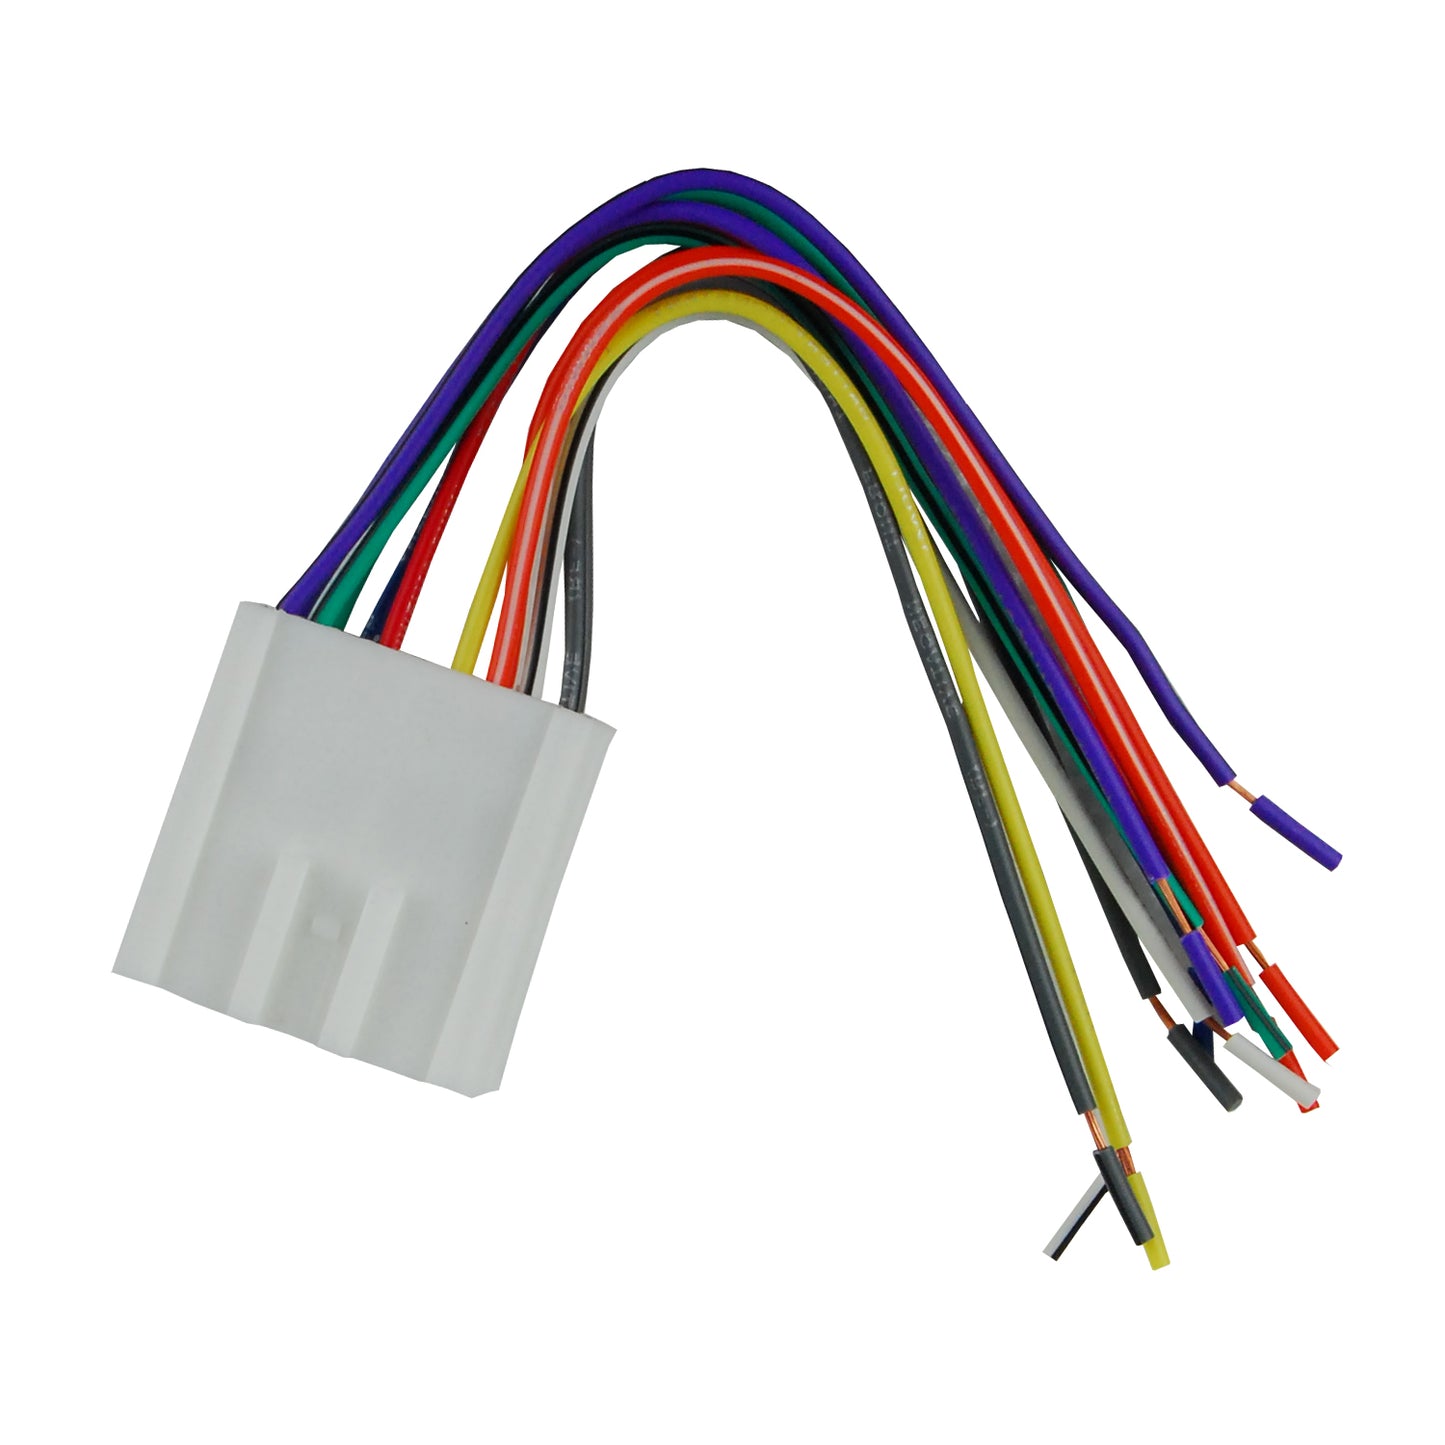 WH-MIT 9410 - Wiring Harness for Mitsubishi